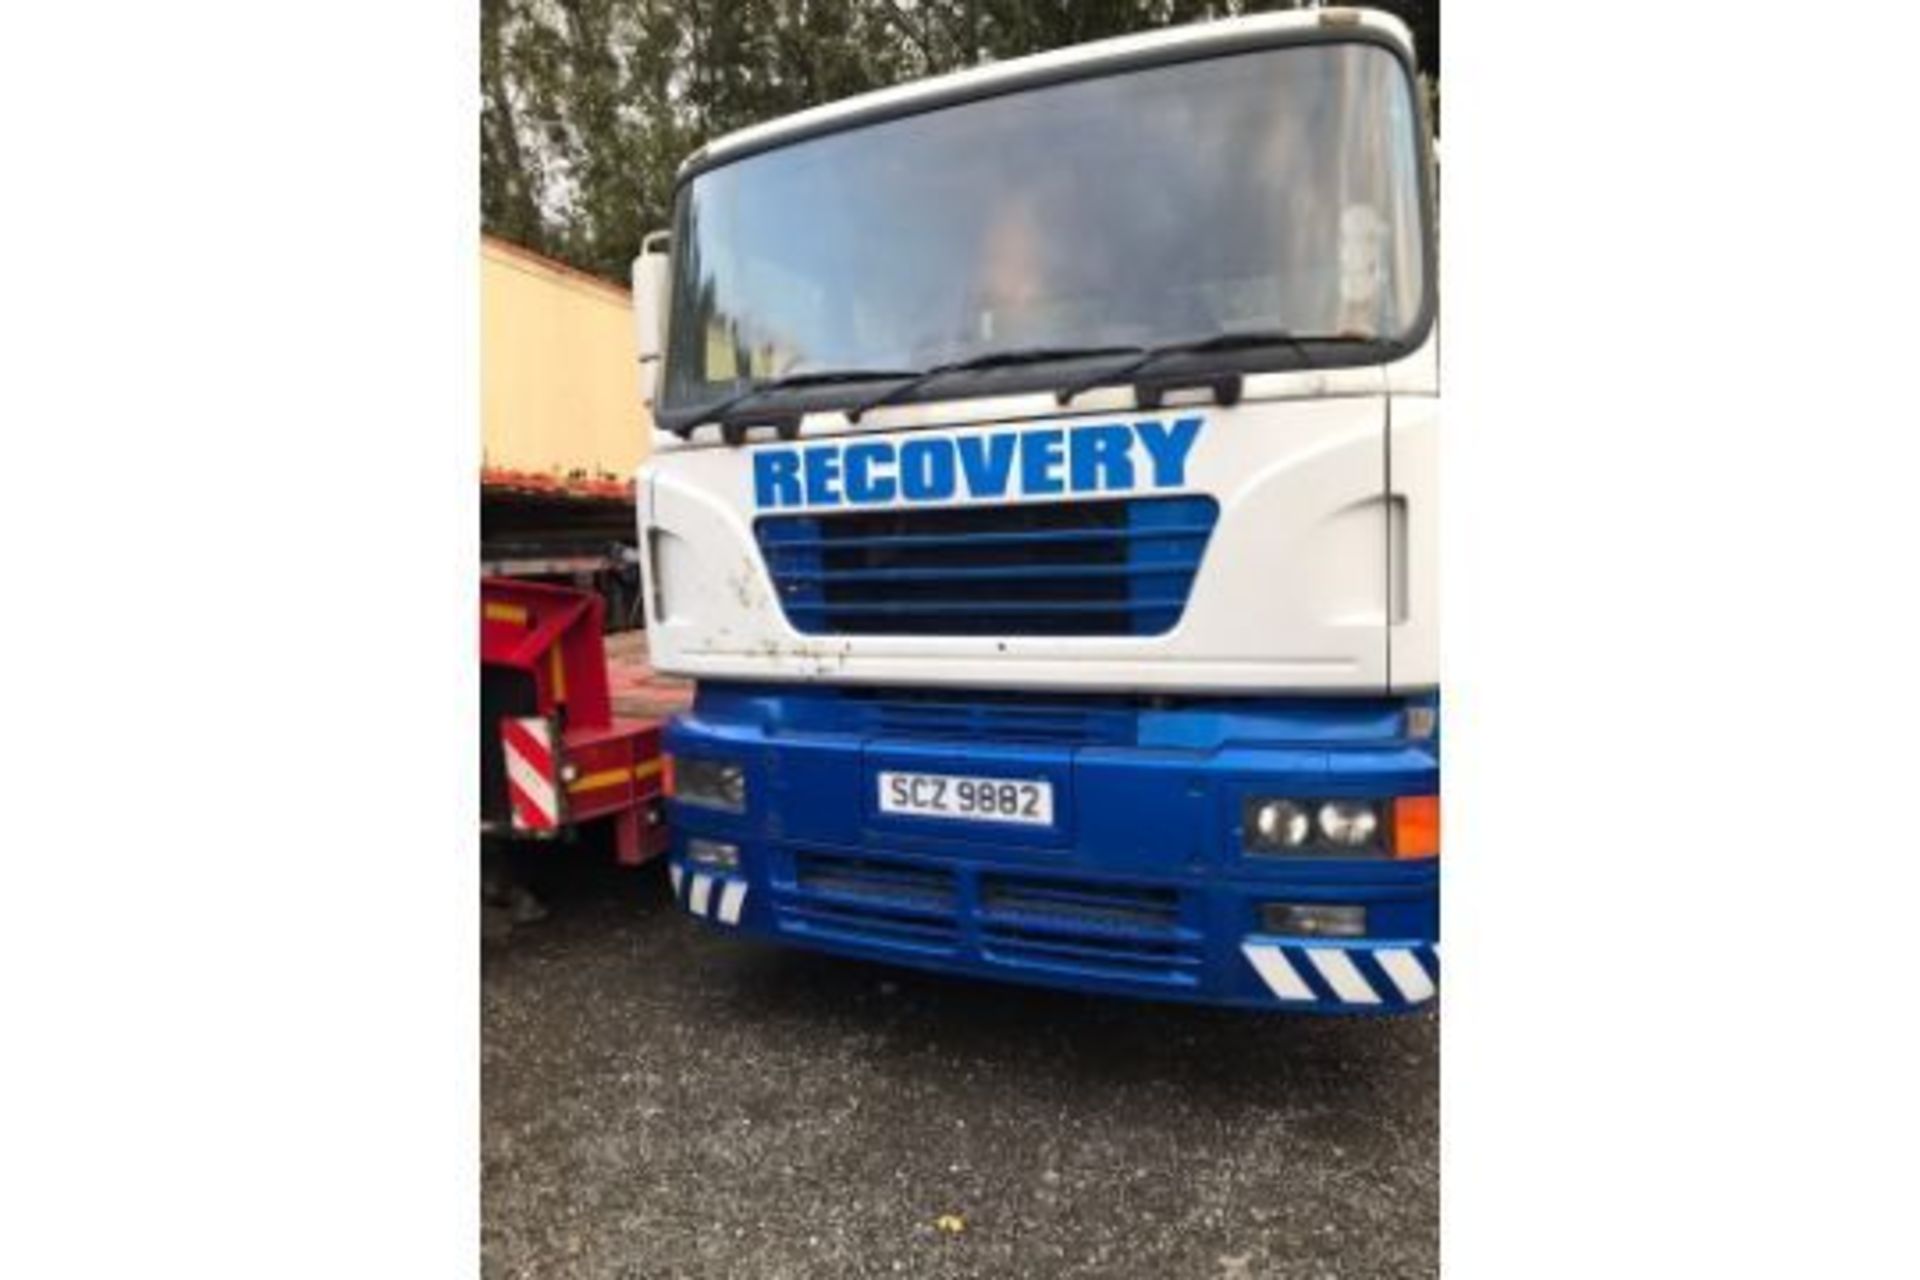 2001 RECOVERY TRUCK - Image 2 of 15